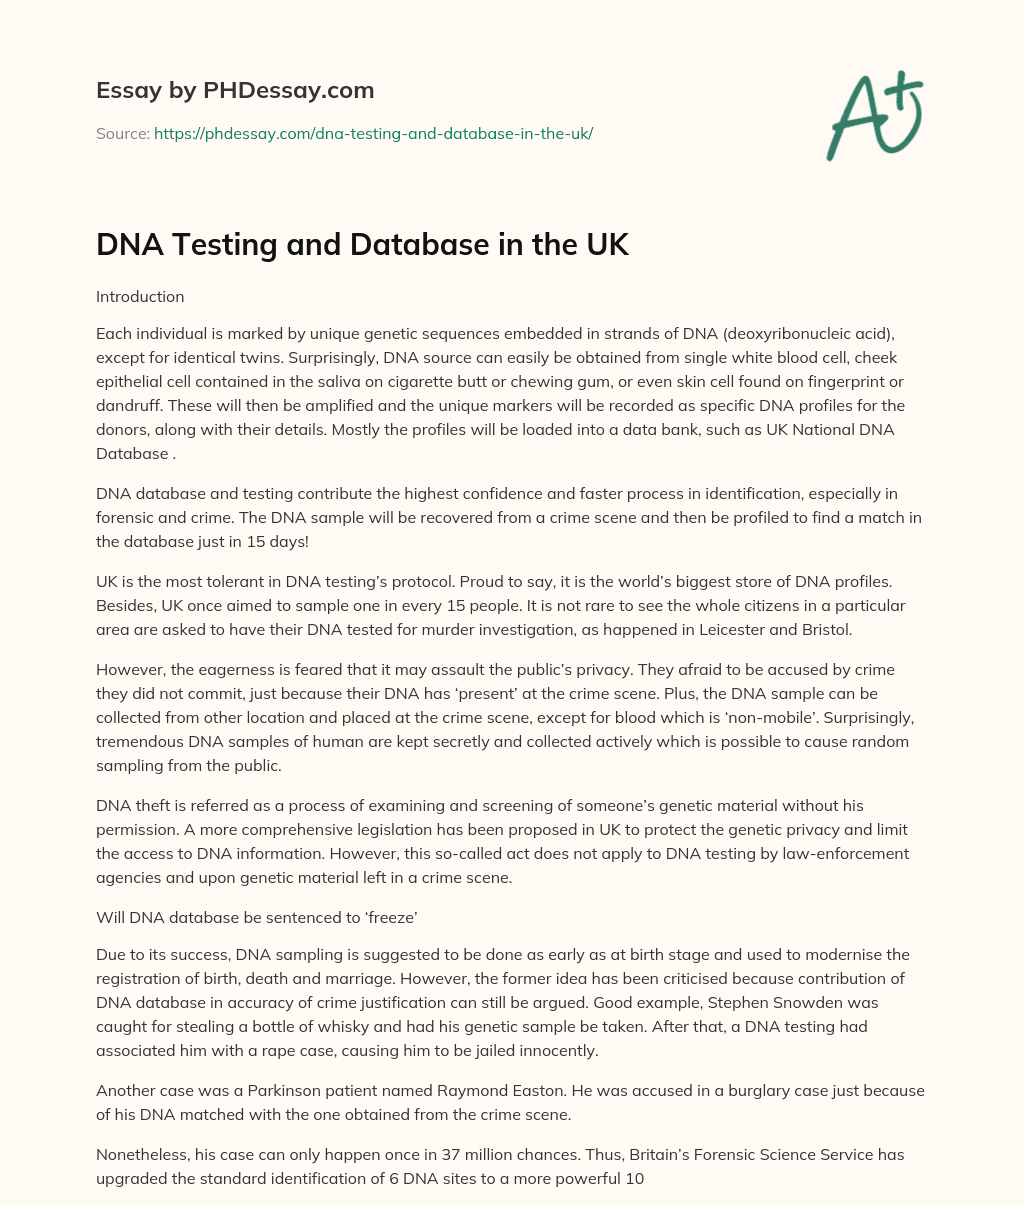 DNA Testing and Database in the UK essay